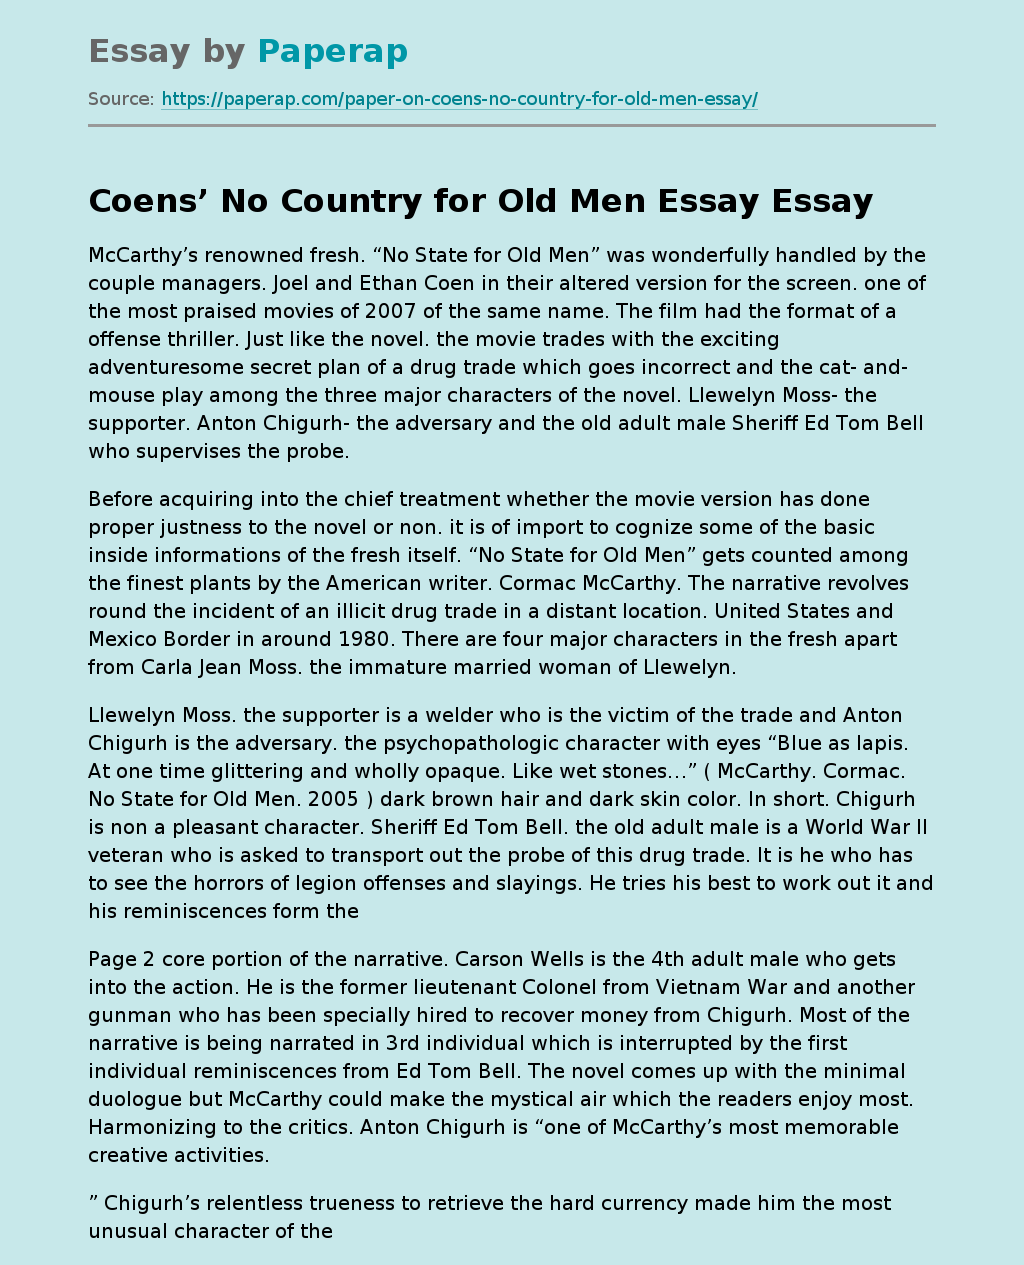 Coens’ No Country for Old Men Essay